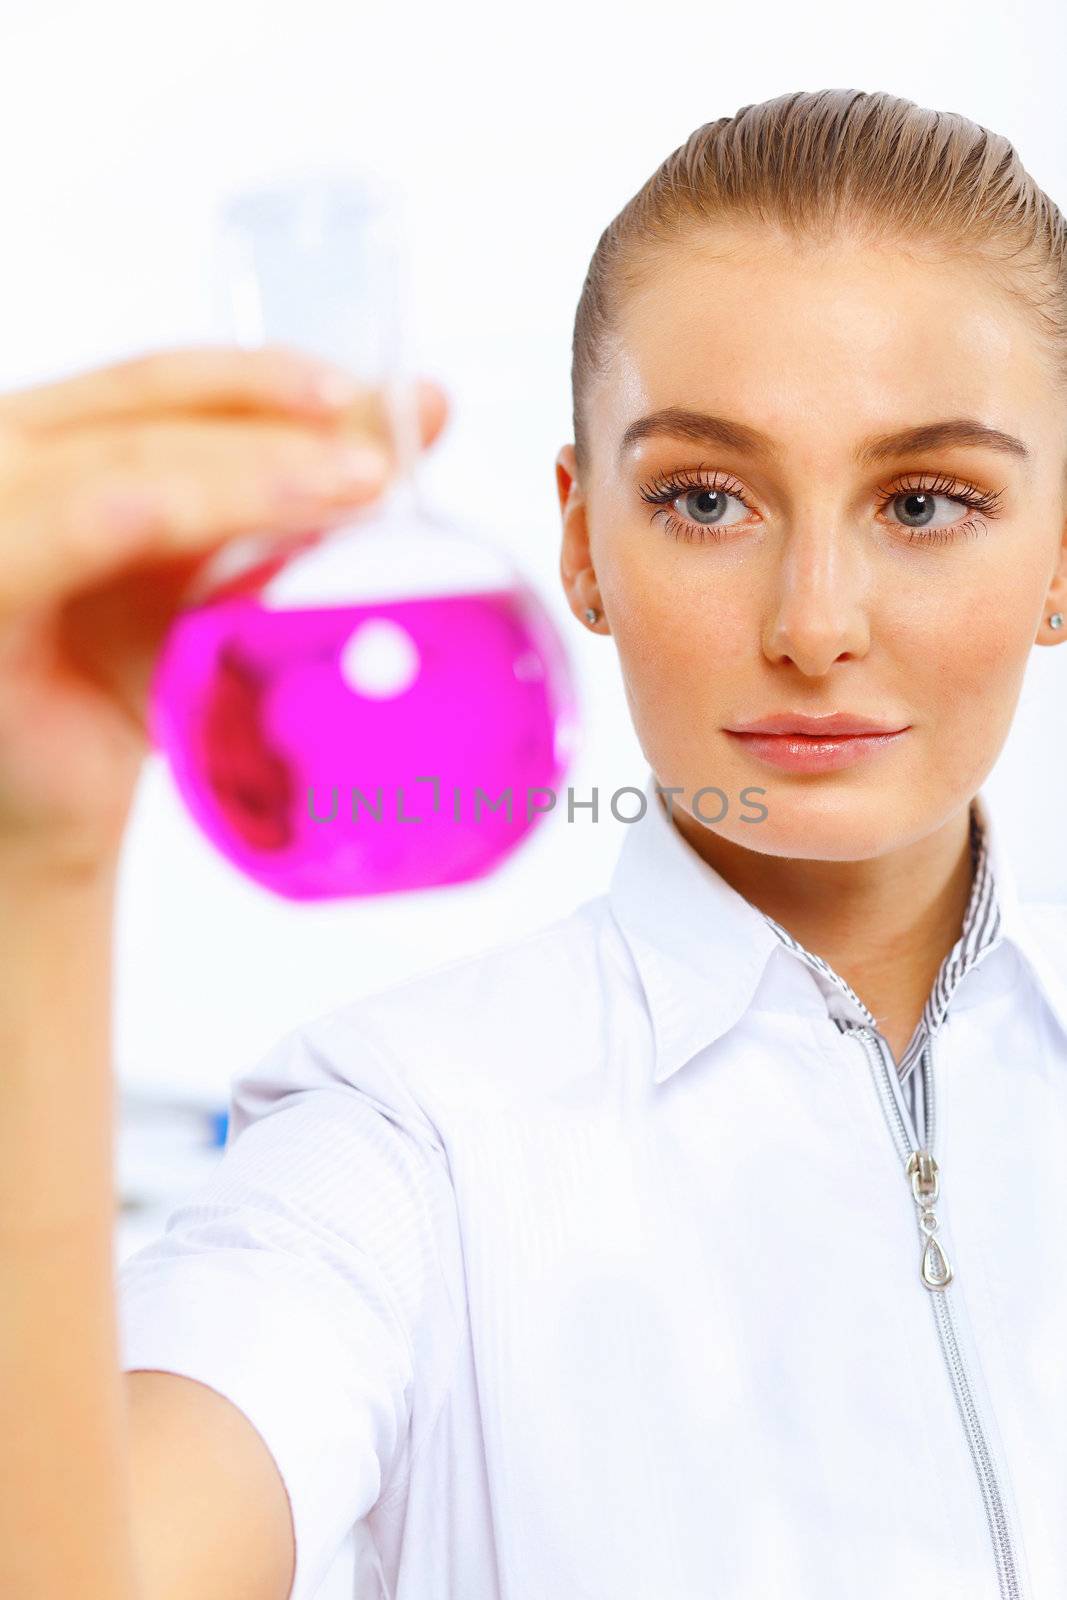 Young female scientist working in laboratory by sergey_nivens